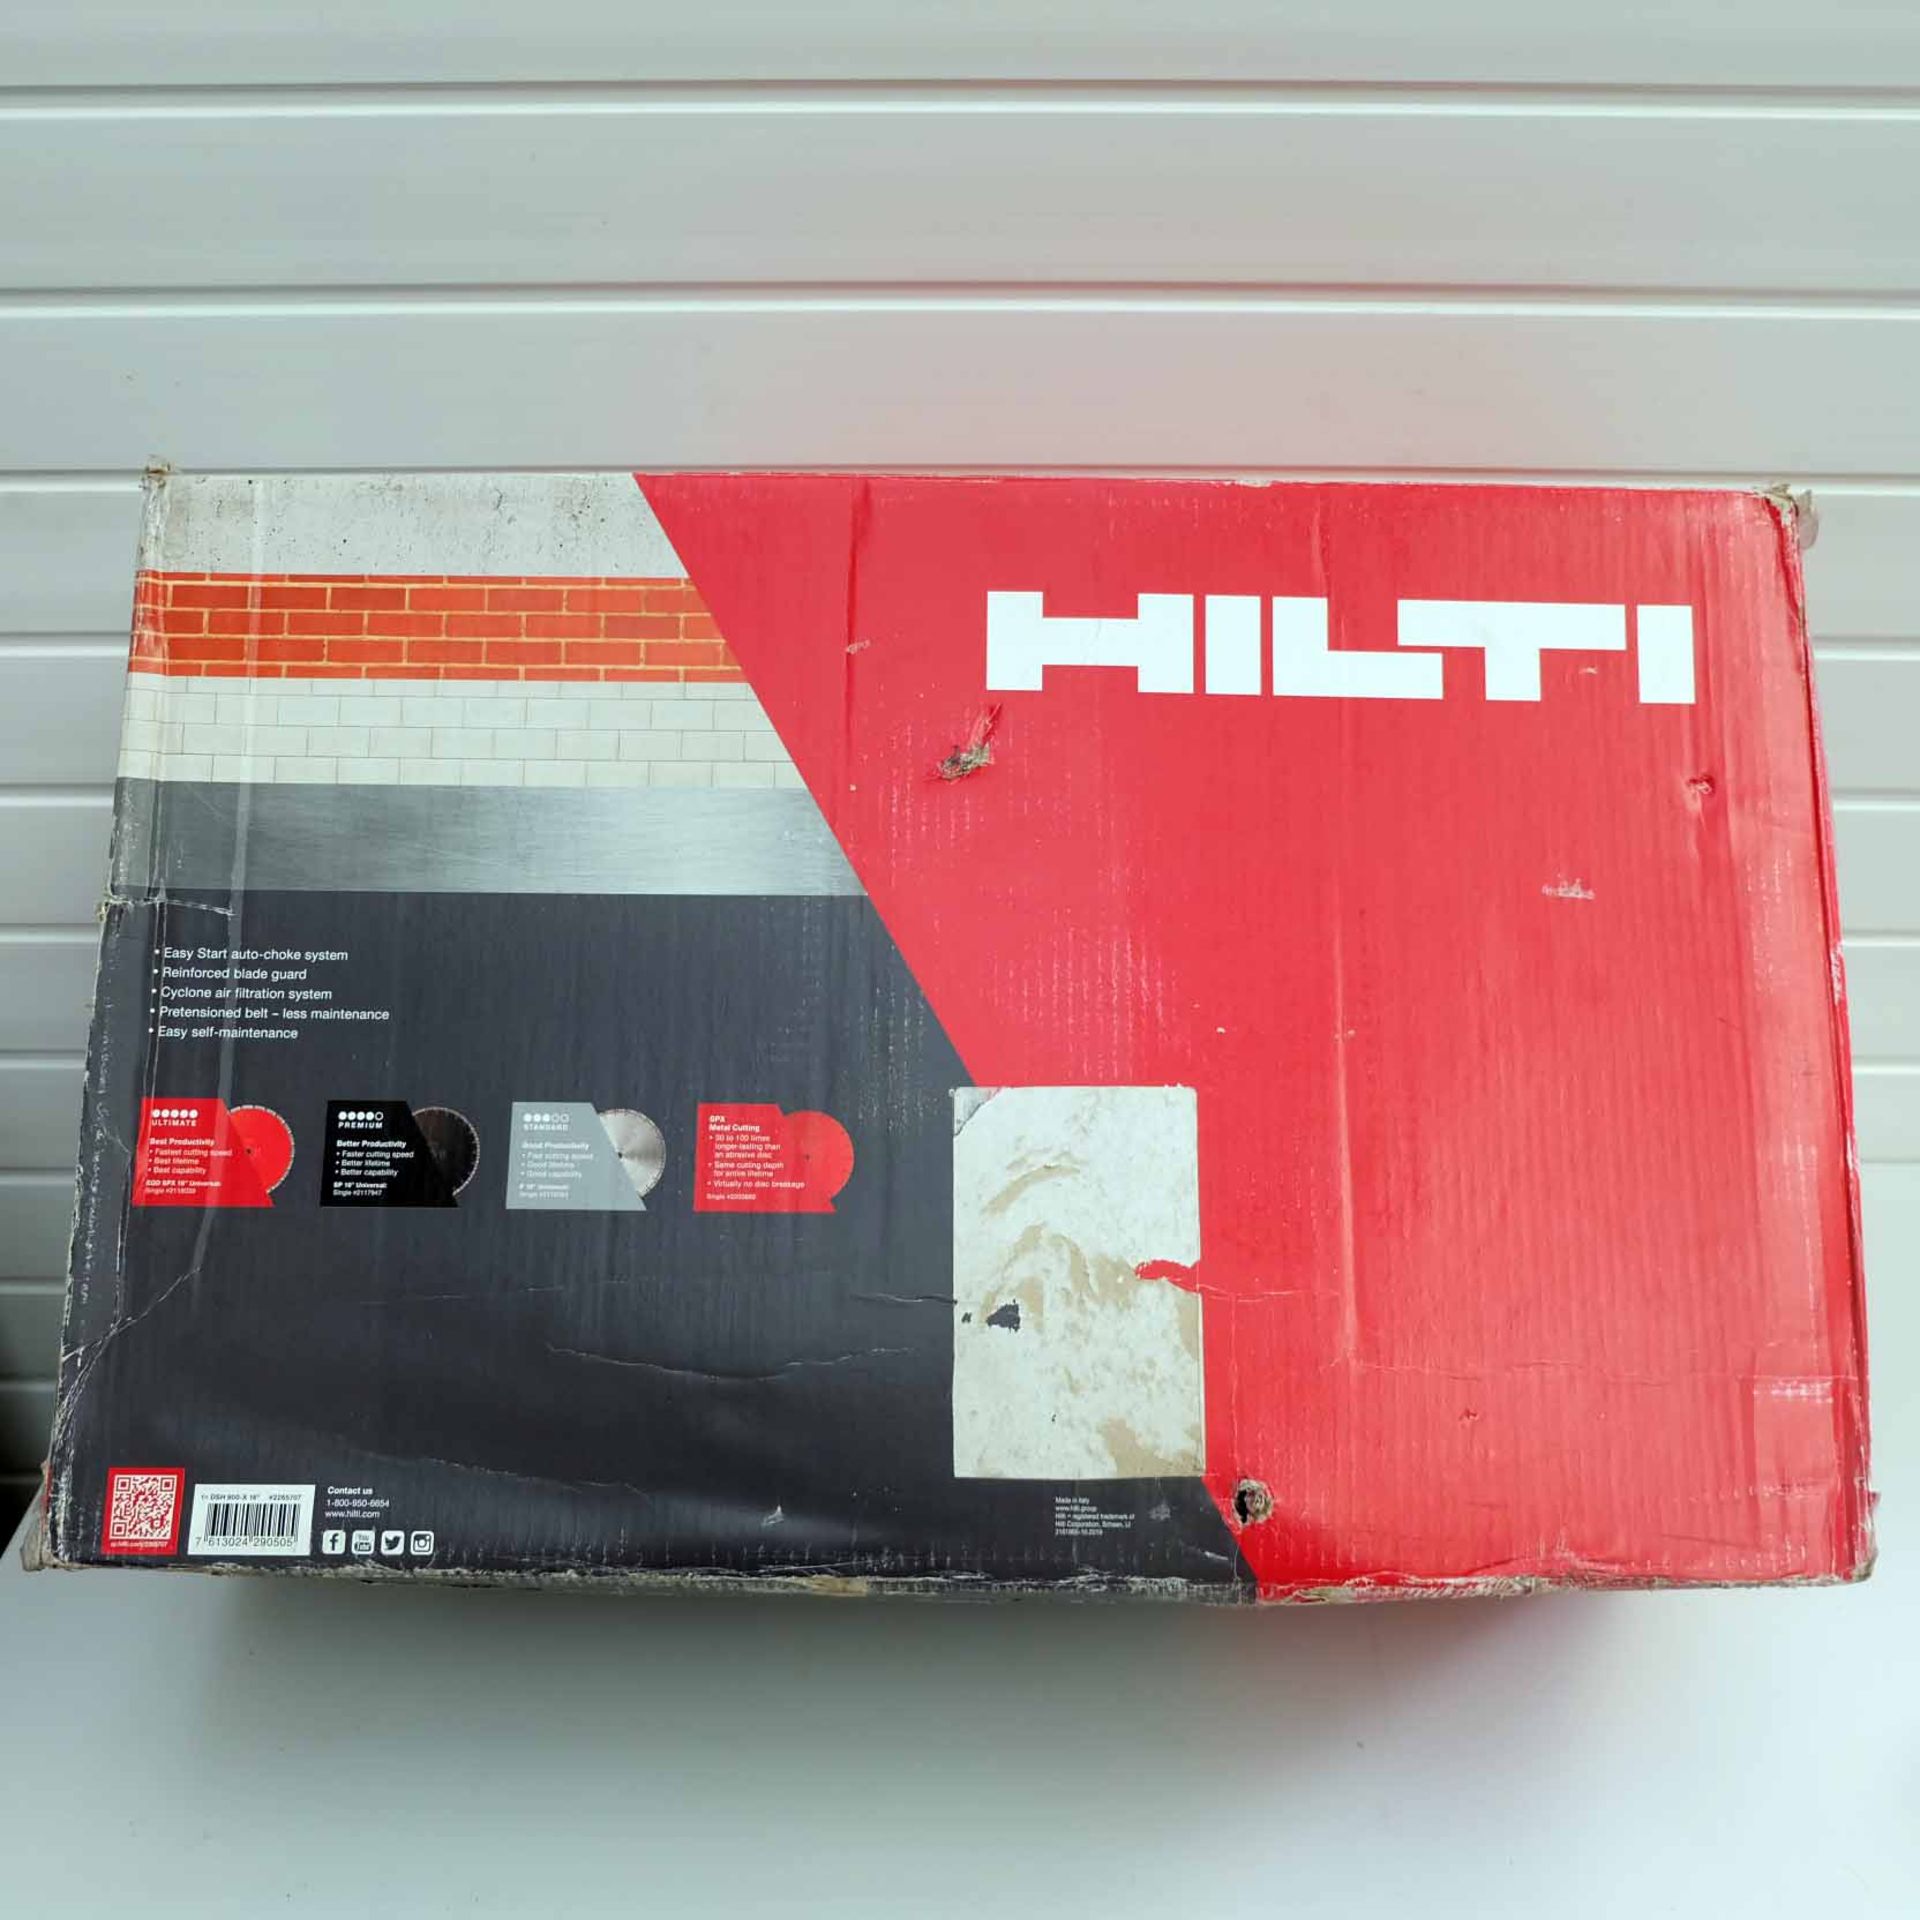 Hilti Hand Held Gas Saw. Model DSH 900-X 16". Complete With SP-16"x1" Blade. Easy Start Auto-Choke S - Image 22 of 25